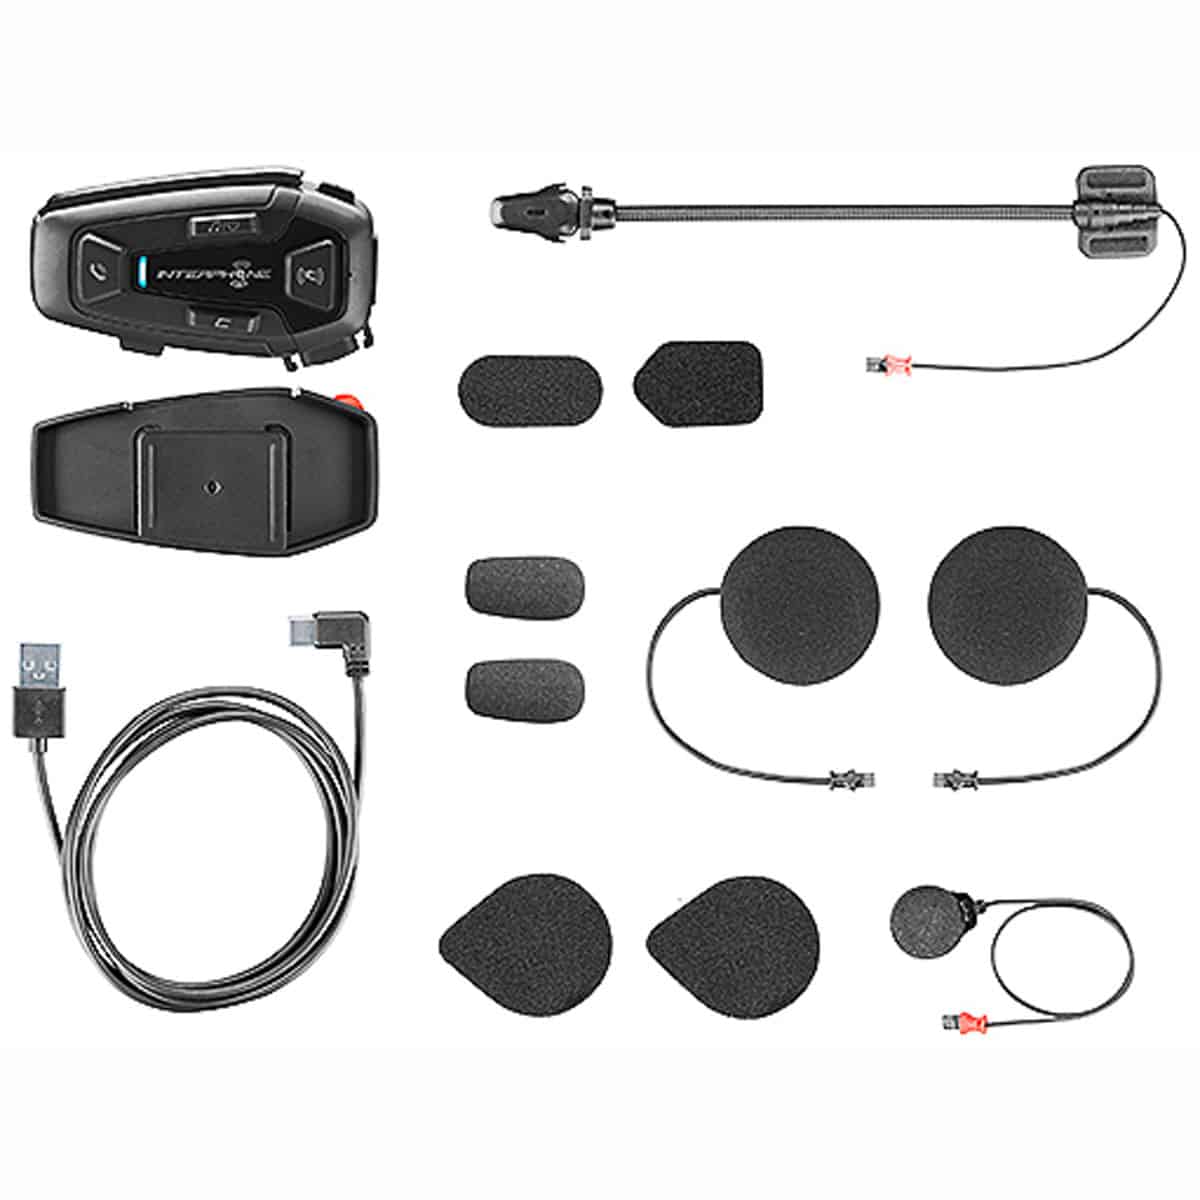 The Interphone U-COM 8R Intercom is the perfect choice for riders who want an easy to use, reliable and advanced Intercom system with Mesh 2.0 technology.